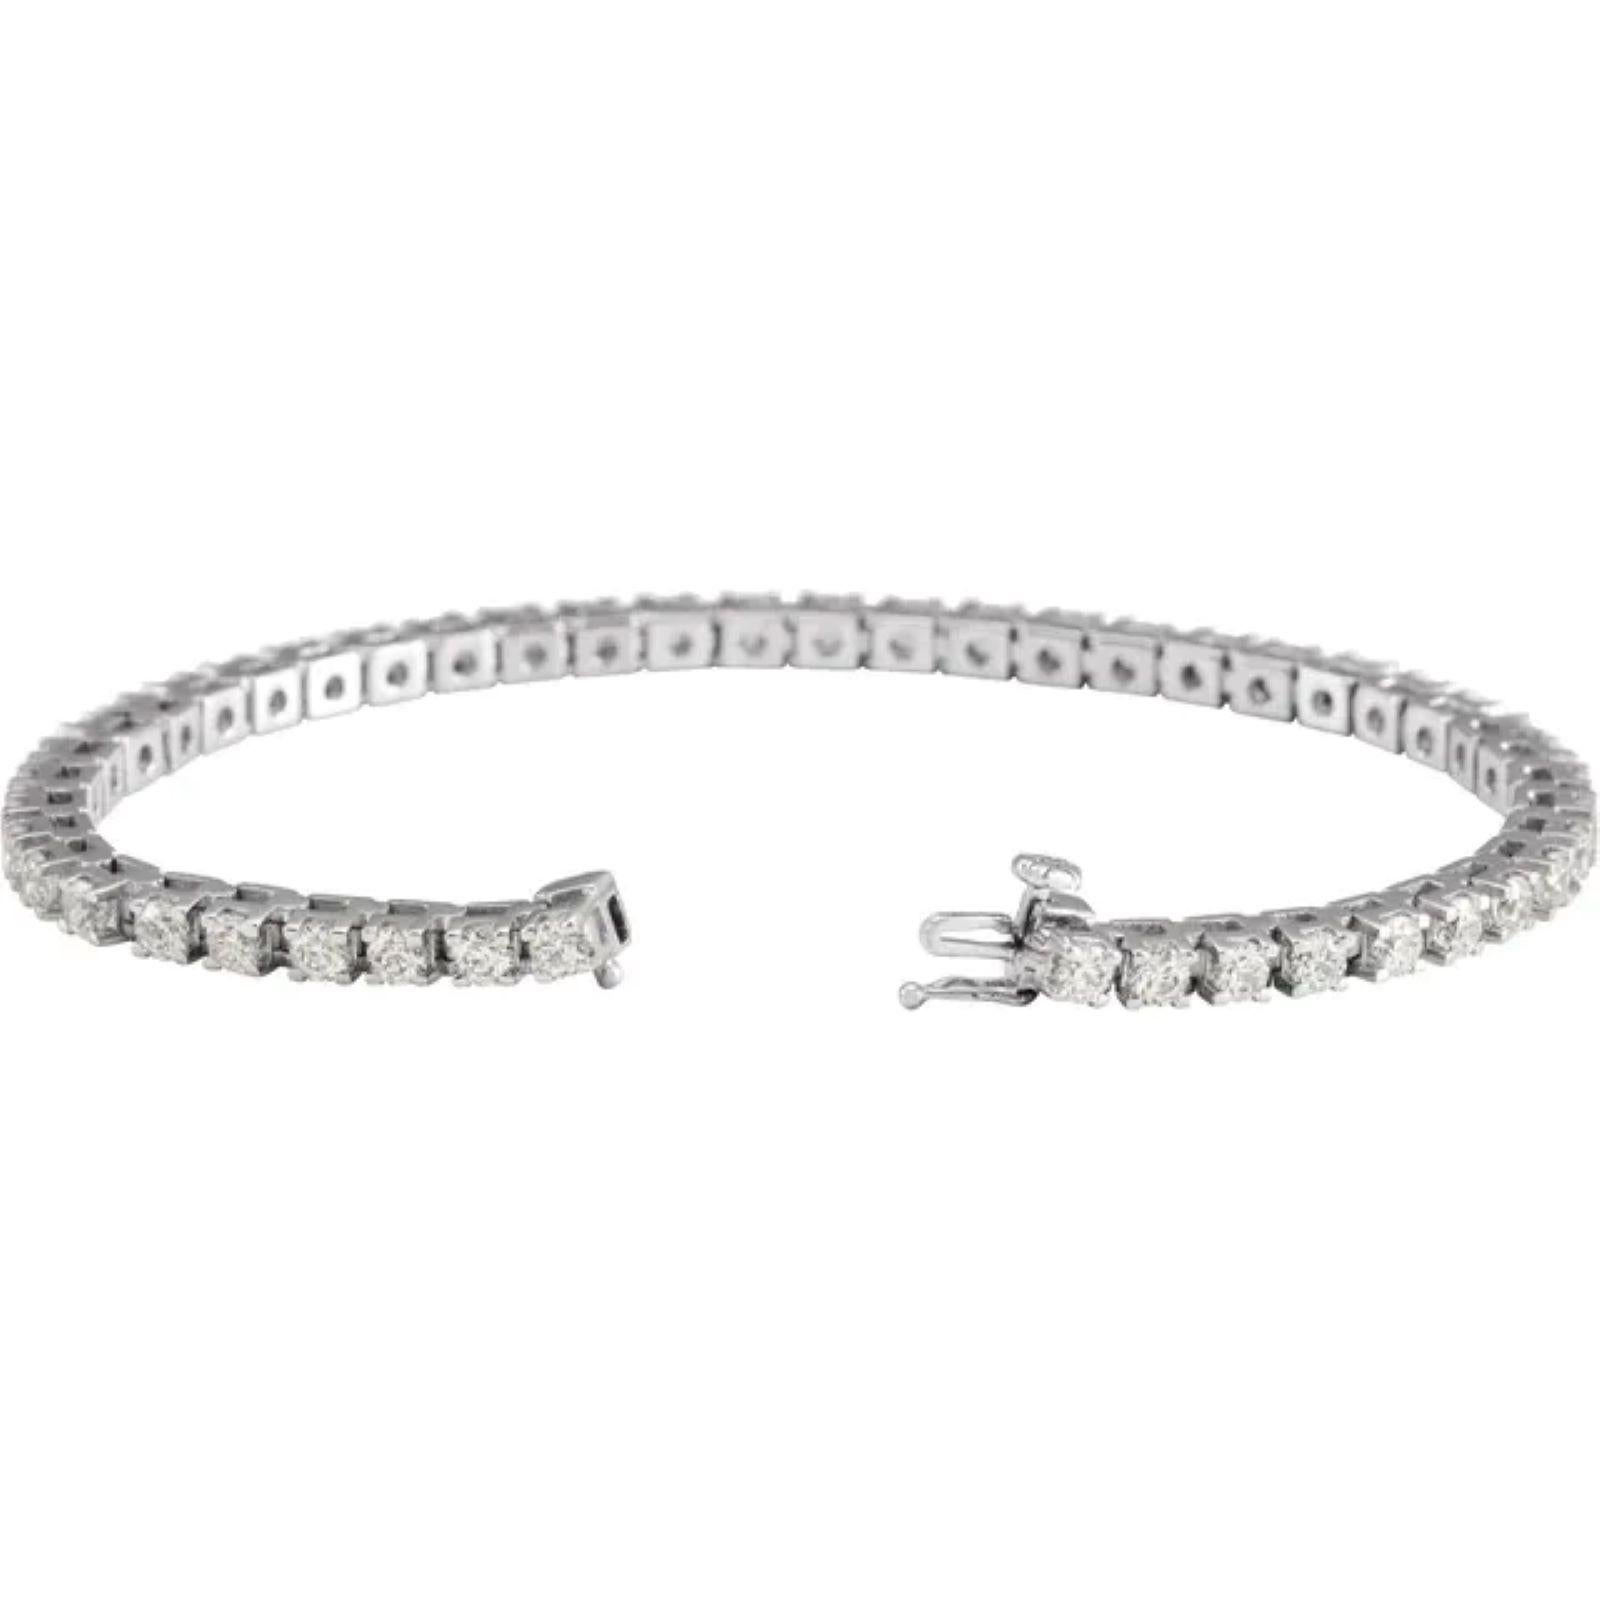 Specifications
Weight:	11.03 DWT (17.15 grams)
Solid/Hollow:	Solid
Bracelet/Anklet Size:	7 1/4 In
Prong Count:	4-prong
Bracelet Closure Type:	Hidden Clasp
Bracelet Type:	Line
Selling Unit of Measure:	EA
Gender:	Ladies
Plating